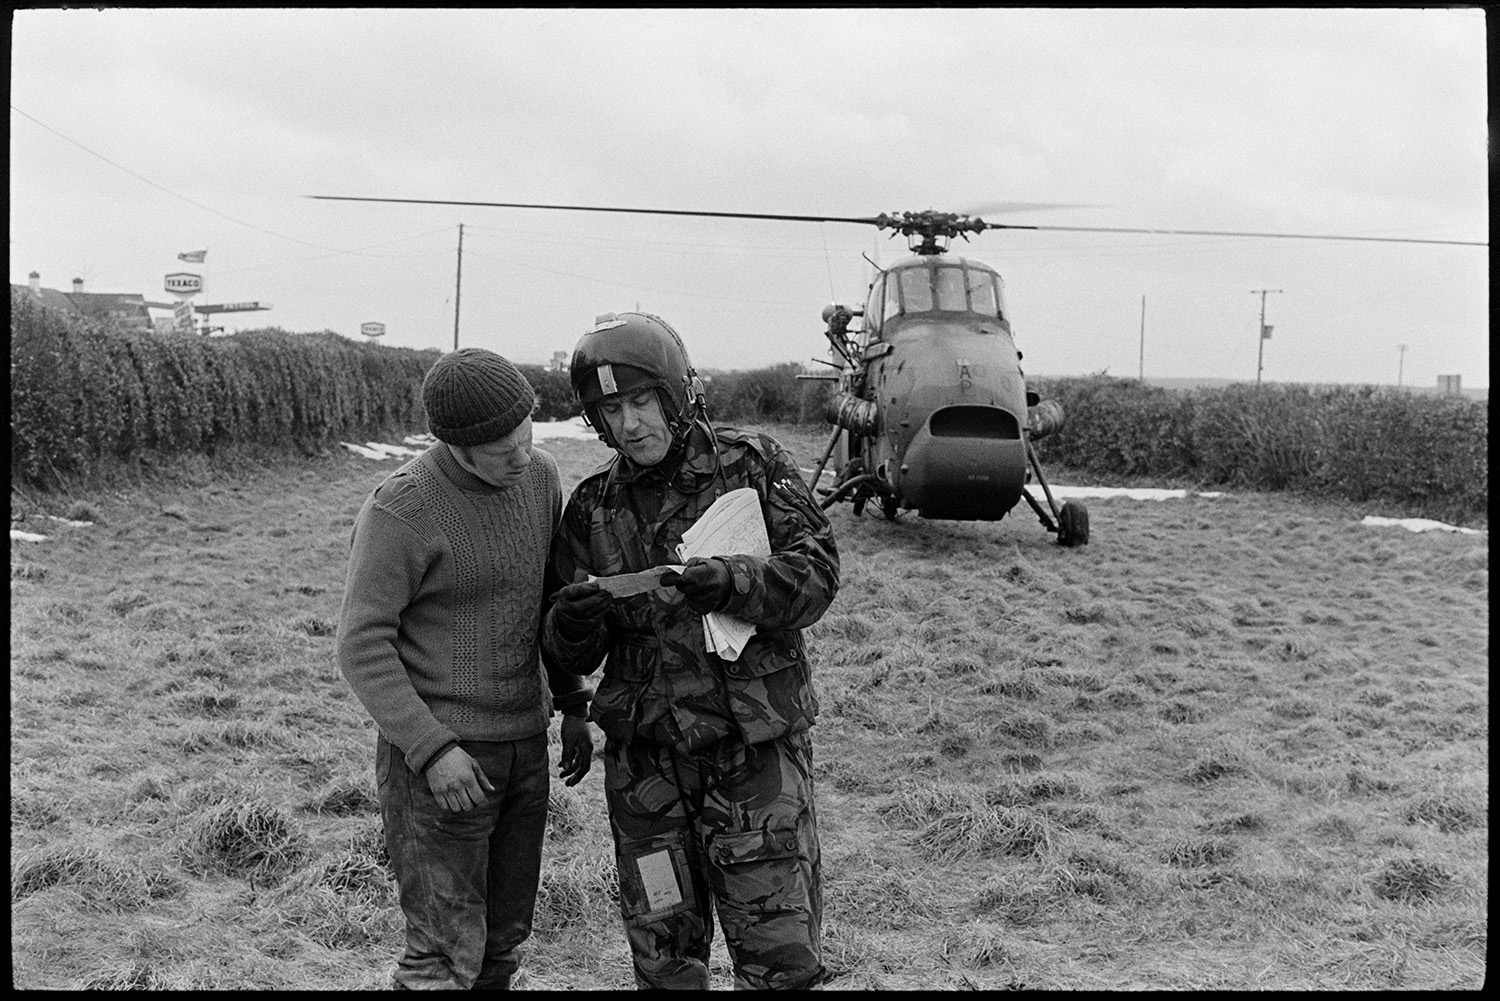 Snow. Helicopter landing to get directions!
[Helicopter pilot talking to a man in a field at Dolton Beacon to get directions. The helicopter is in the background and a Texaco garage sign can be seen over the hedge pf the field.]